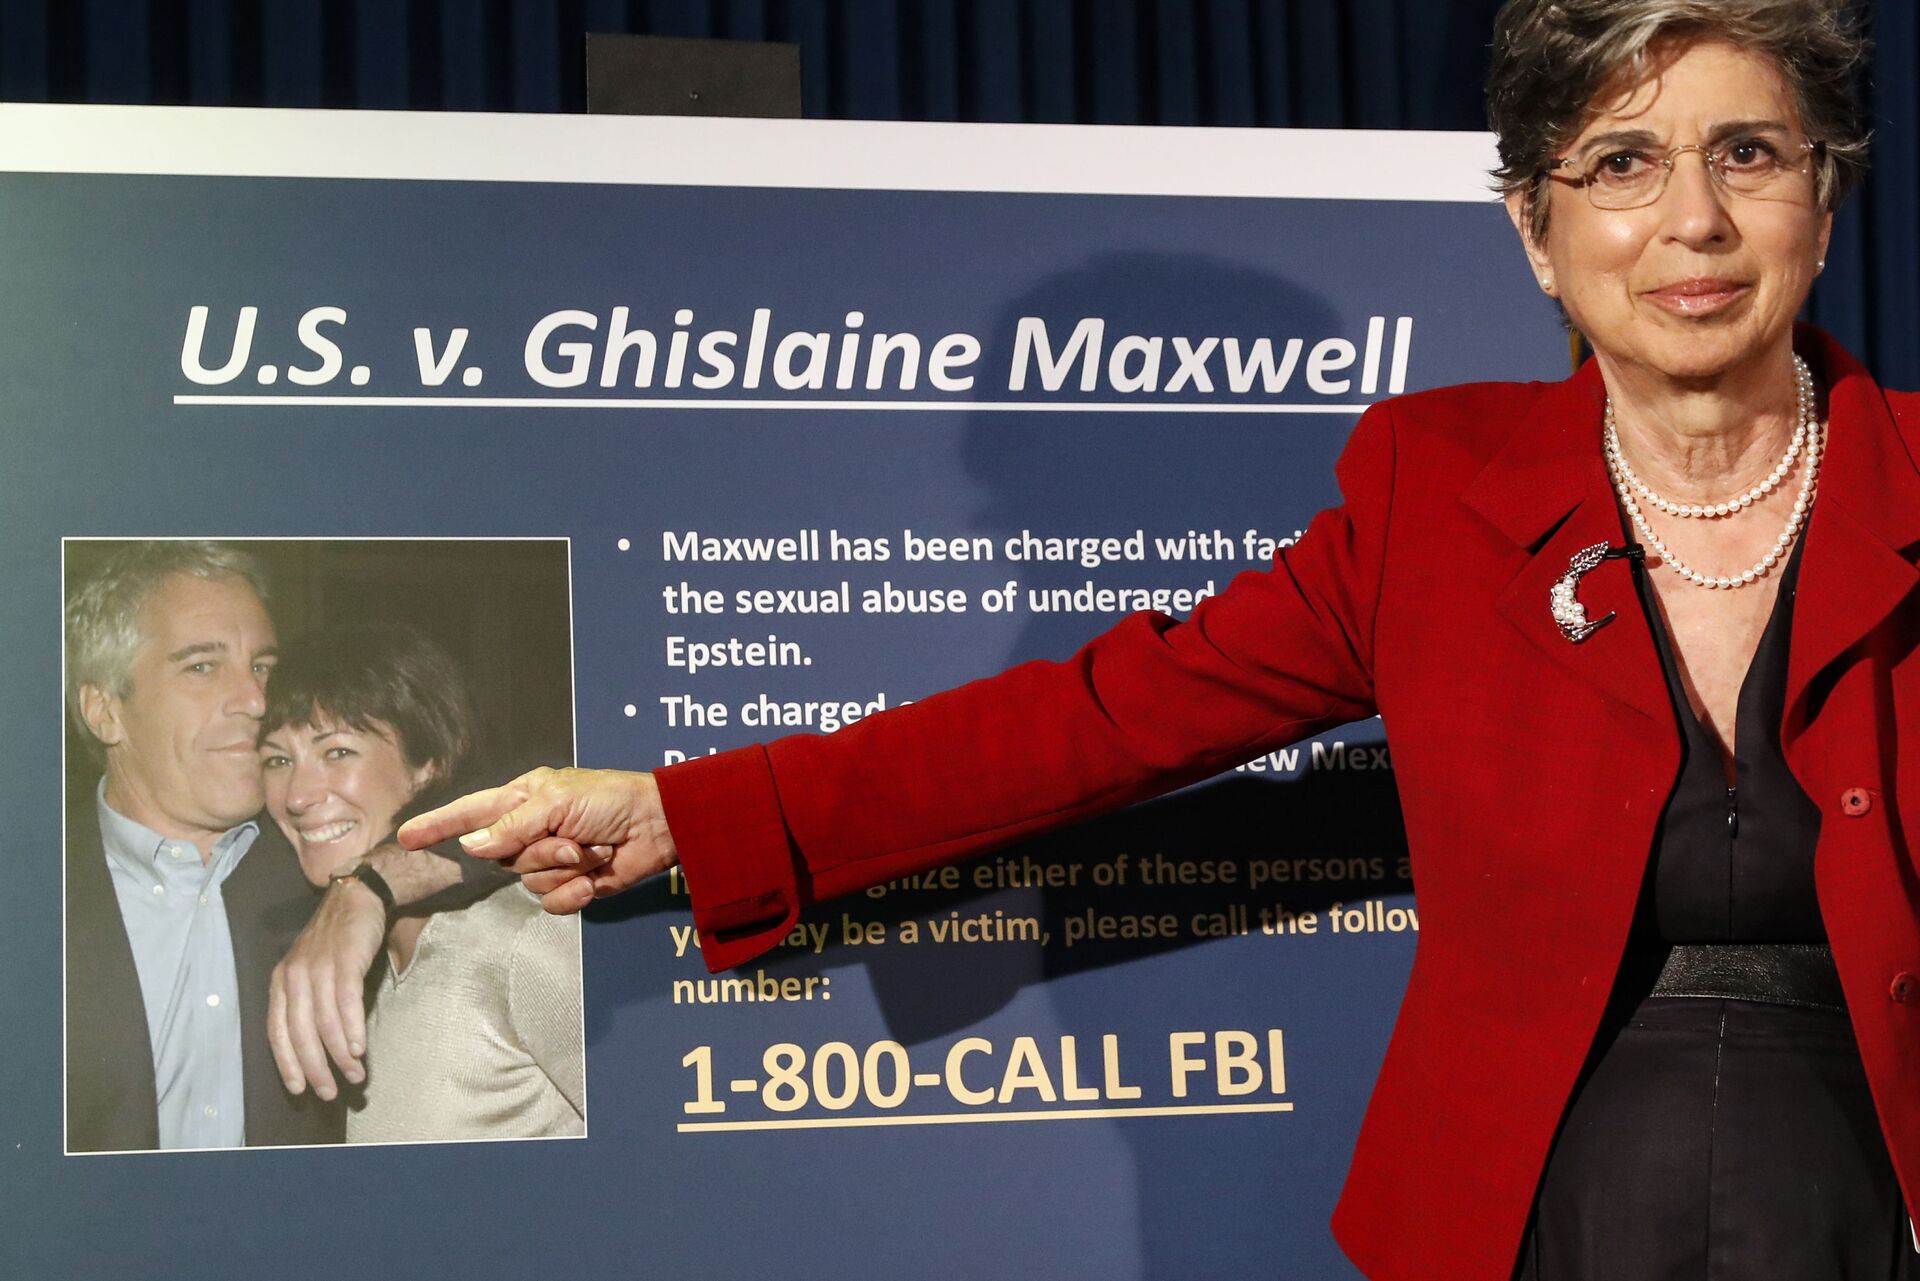 In this Thursday, July 2, 2020, file photo, Audrey Strauss, Acting United States Attorney for the Southern District of New York, gestures as she speaks during a news conference to announce charges against Ghislaine Maxwell for her alleged role in the sexual exploitation and abuse of multiple minor girls by Jeffrey Epstein, in New York - Sputnik International, 1920, 07.09.2021